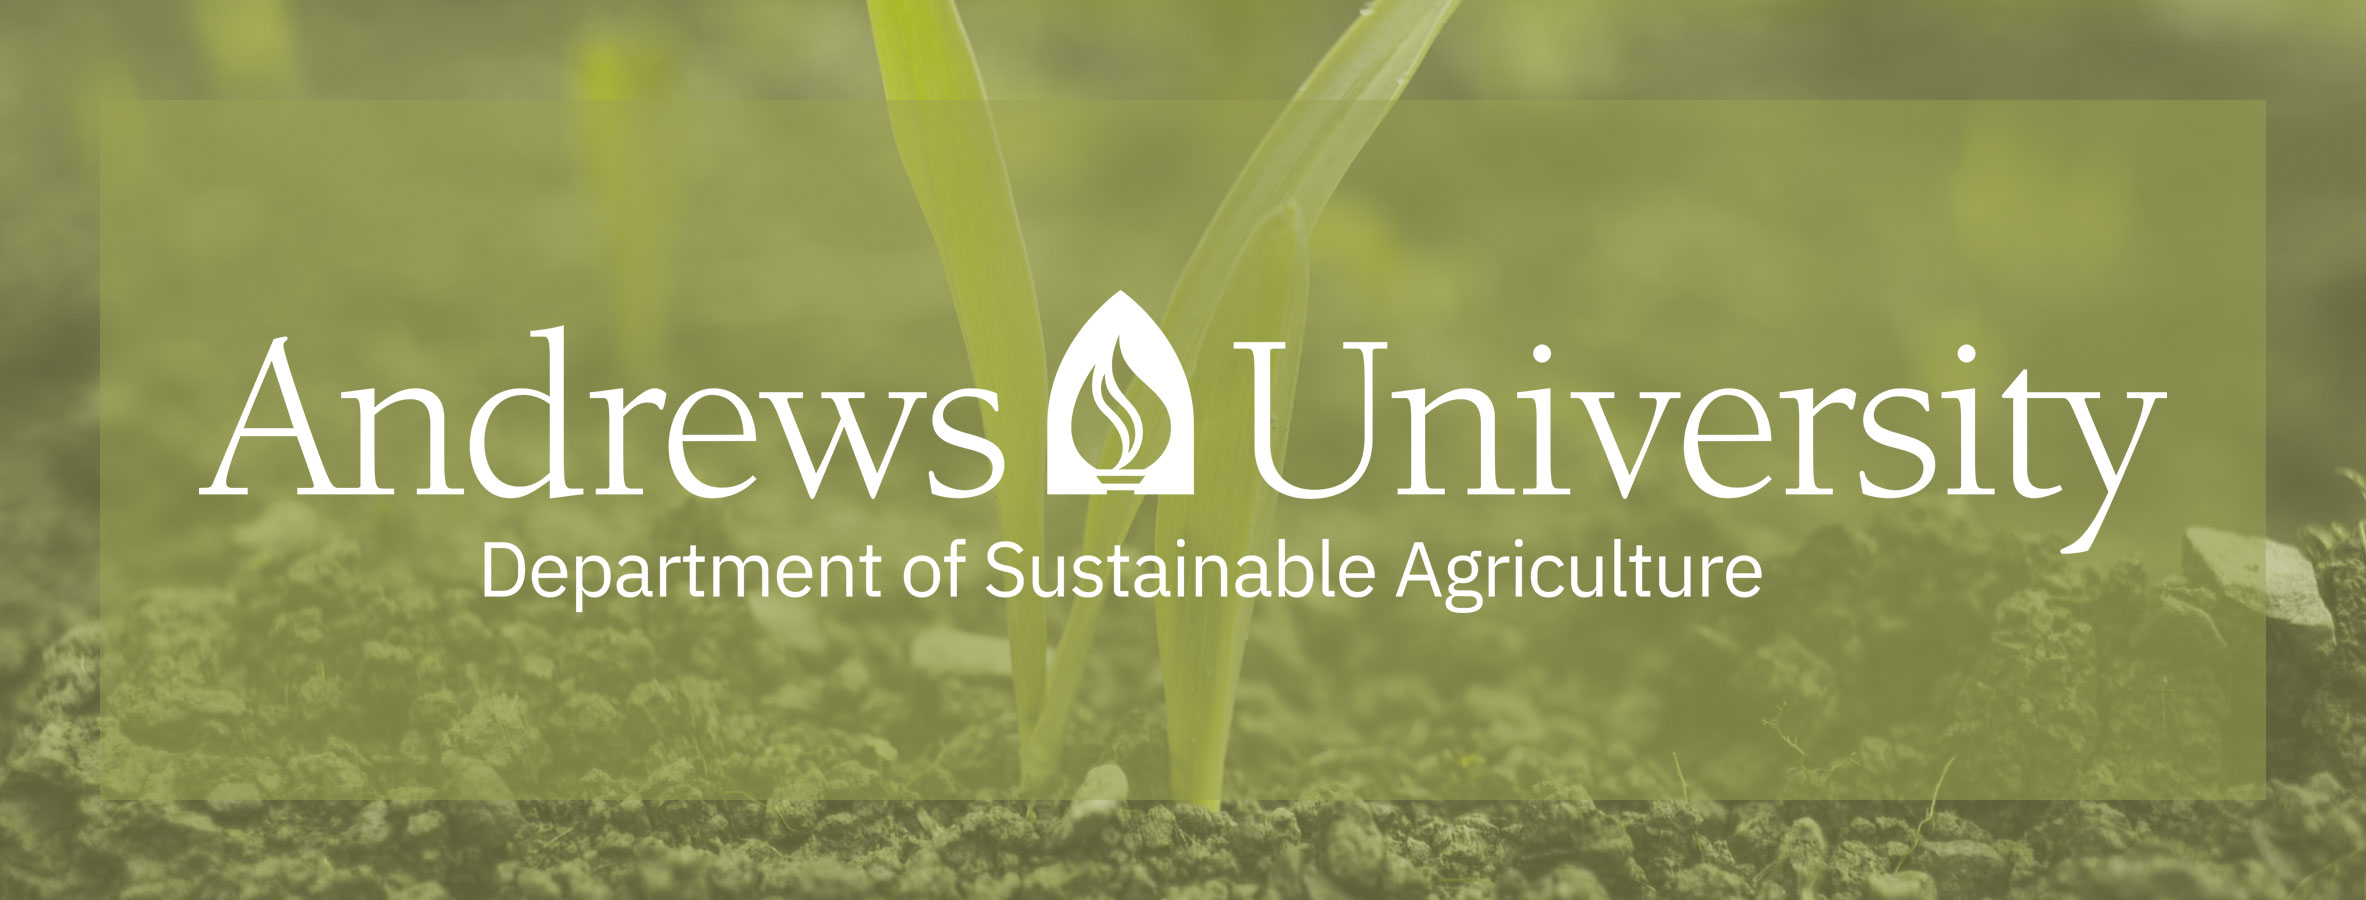 AU Department of Sustainable Agriculture Header Variation 2